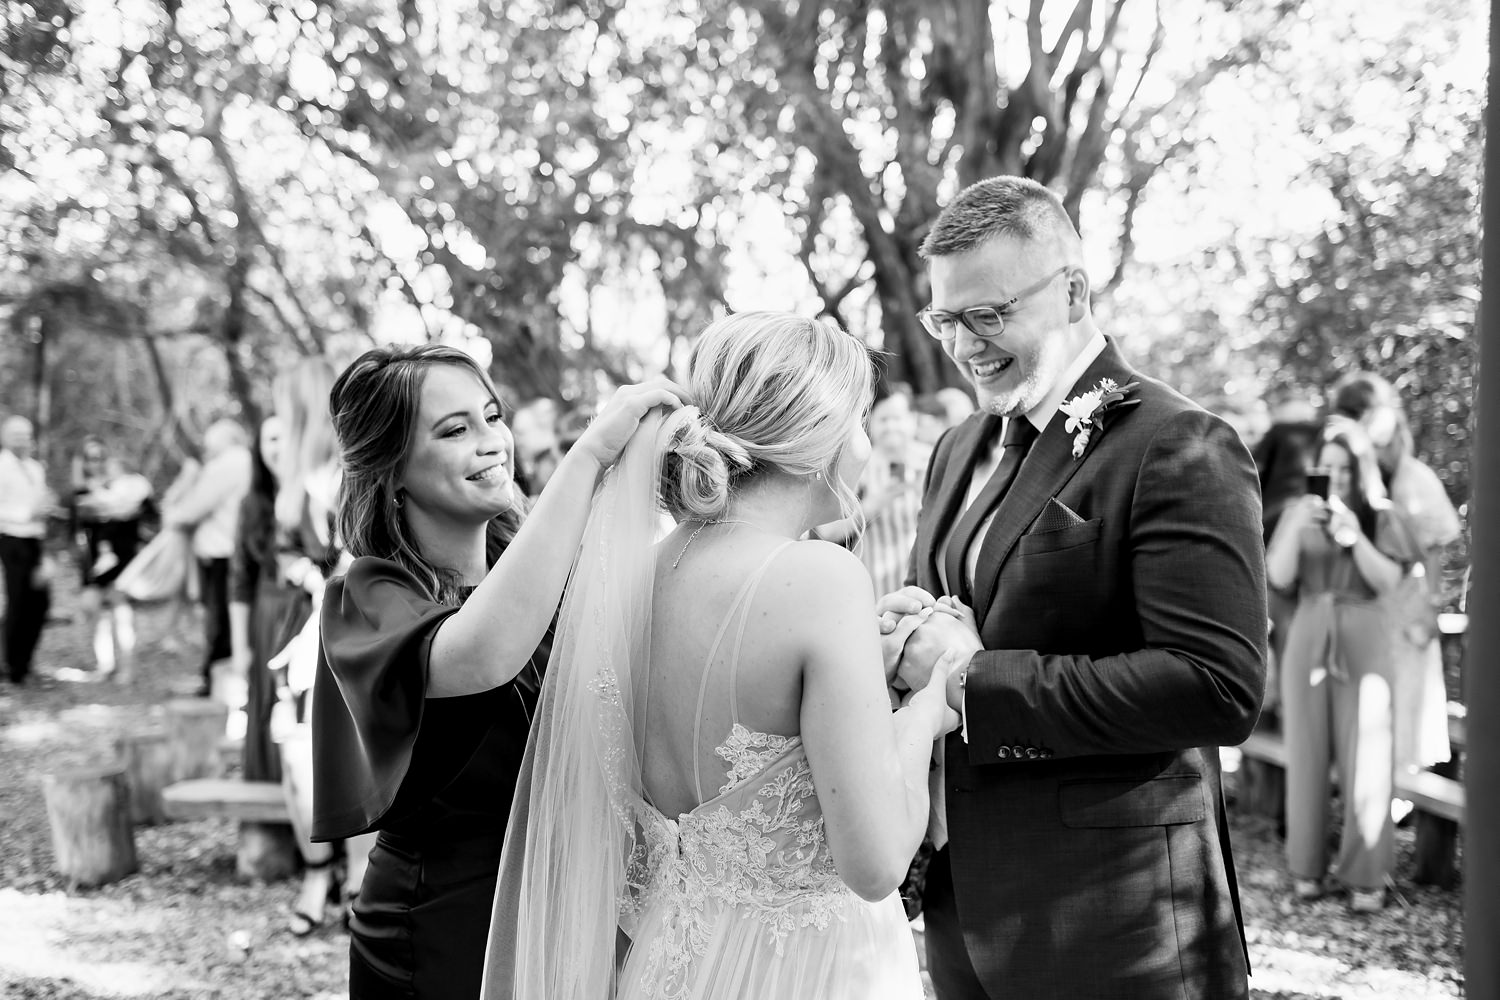 An elated bride and groom share a moment together after the ceremony whilst a bridesmaid fixes the veil. Image by wedding photographer in South Africa, Niki M Photography